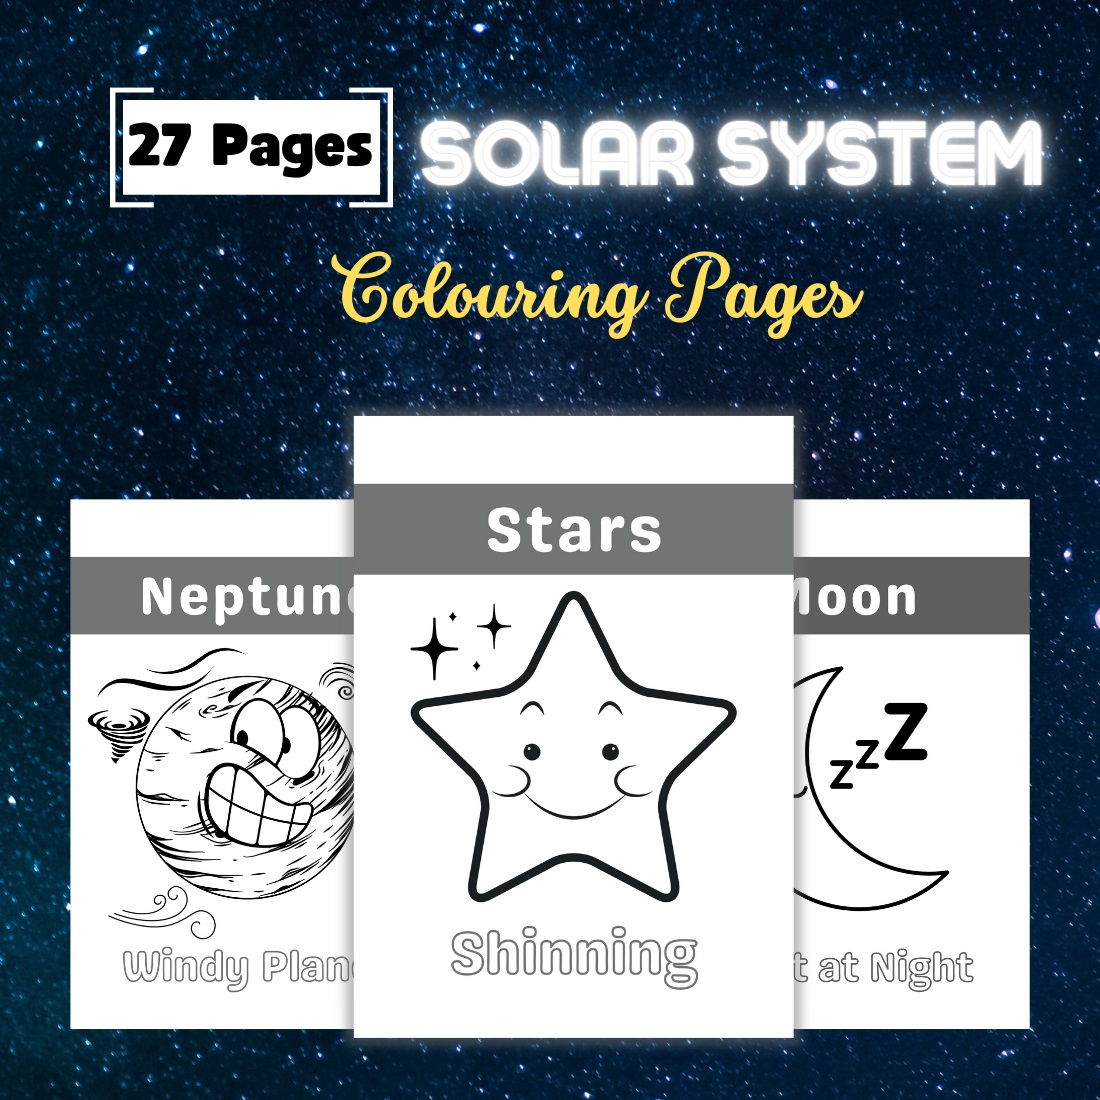 Solar system coloring book for kids template